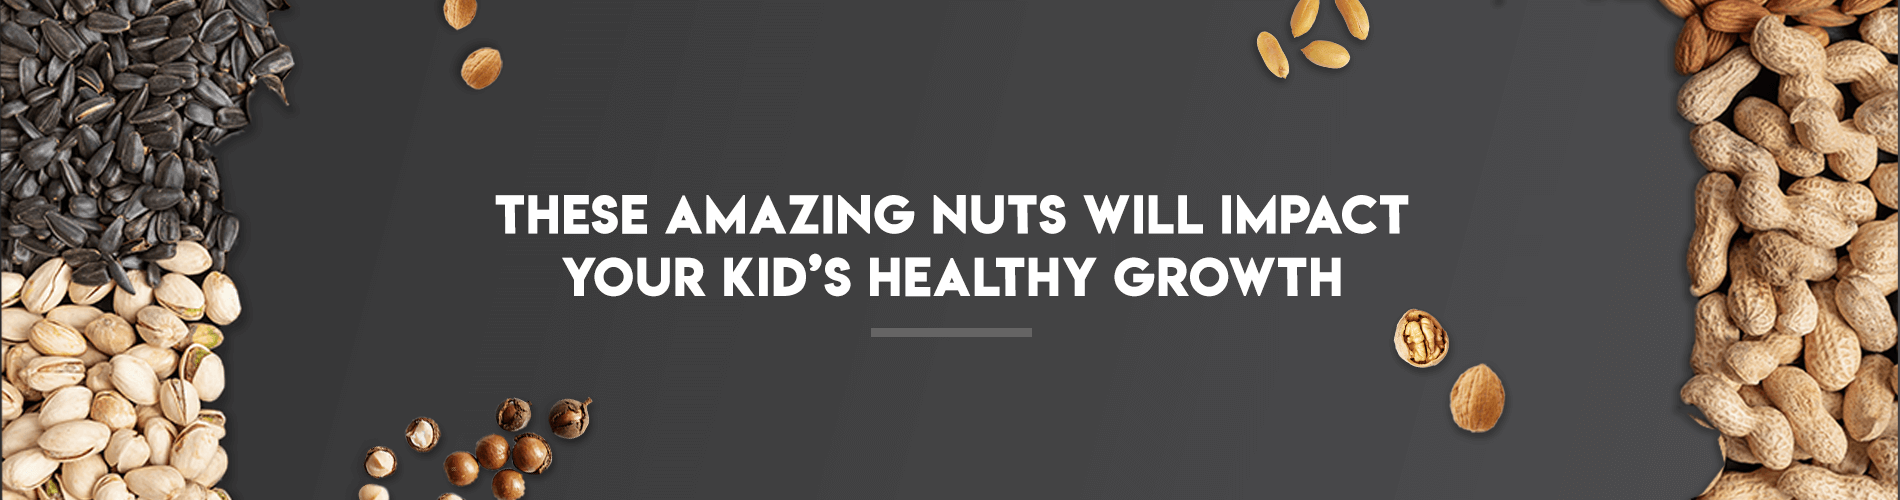 These Amazing Nuts Will Impact Your Kid's Healthy Growth